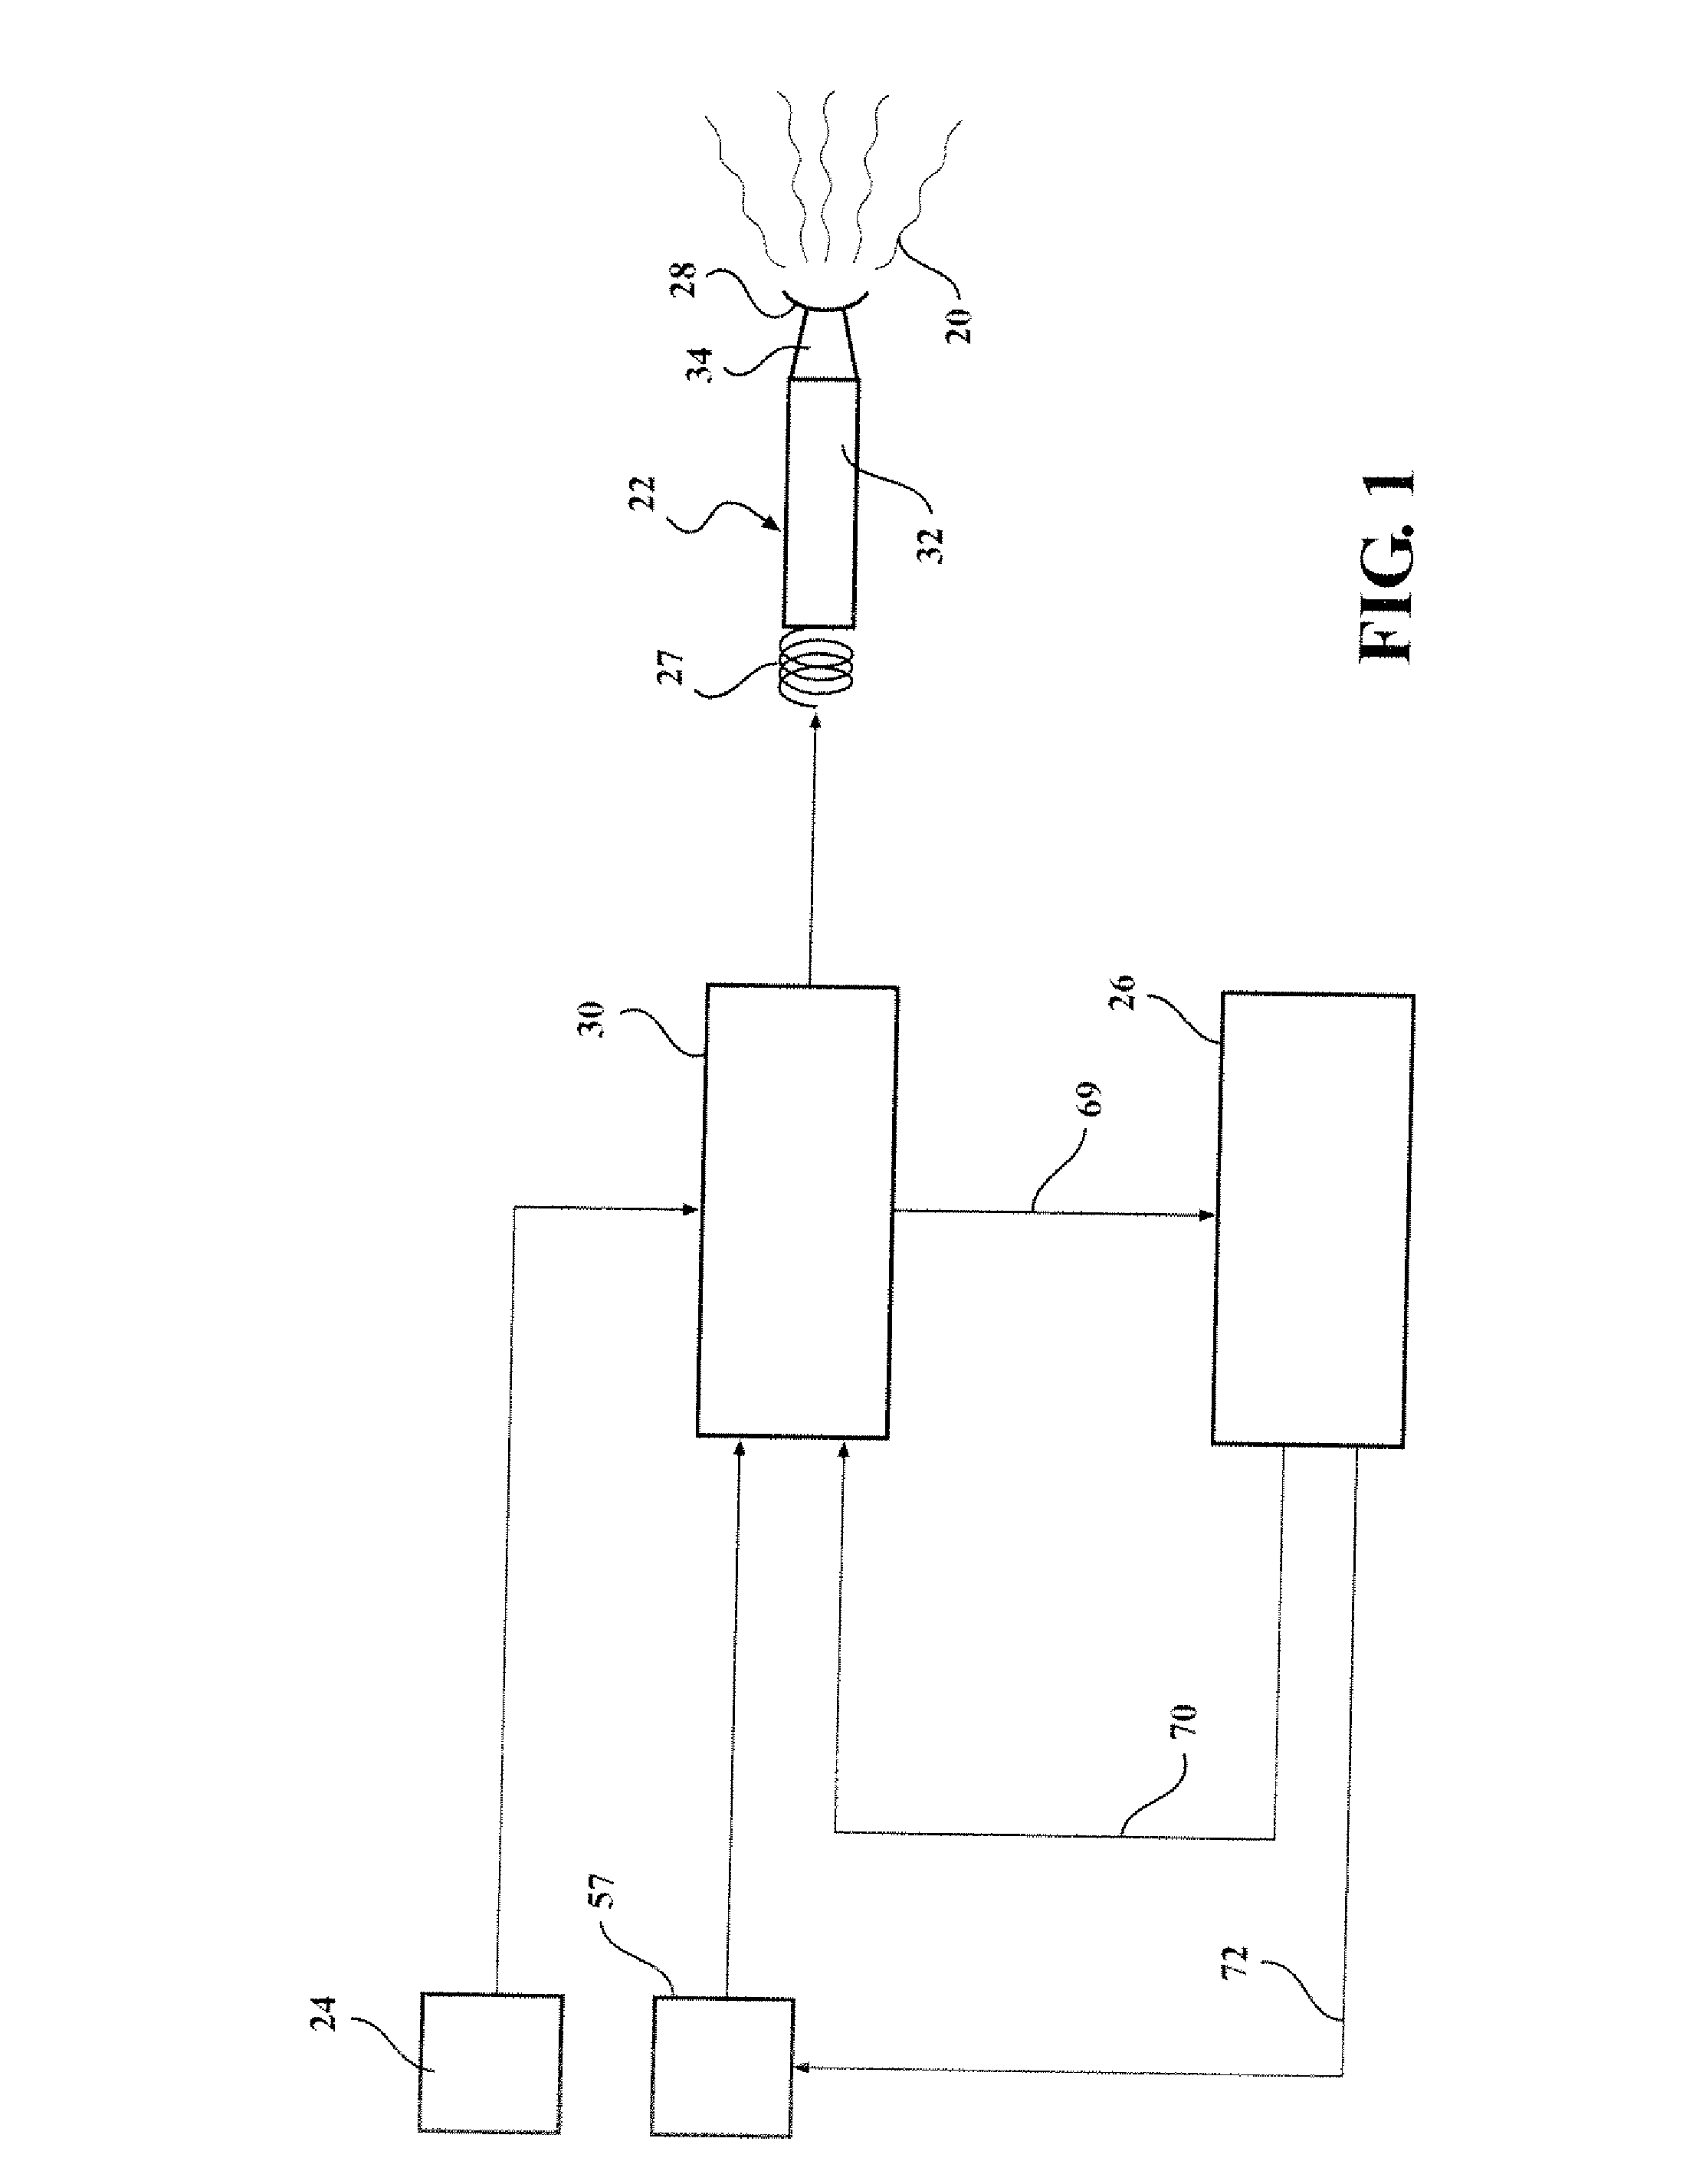 System and method for controlling arc formation in a corona discharge igntition system